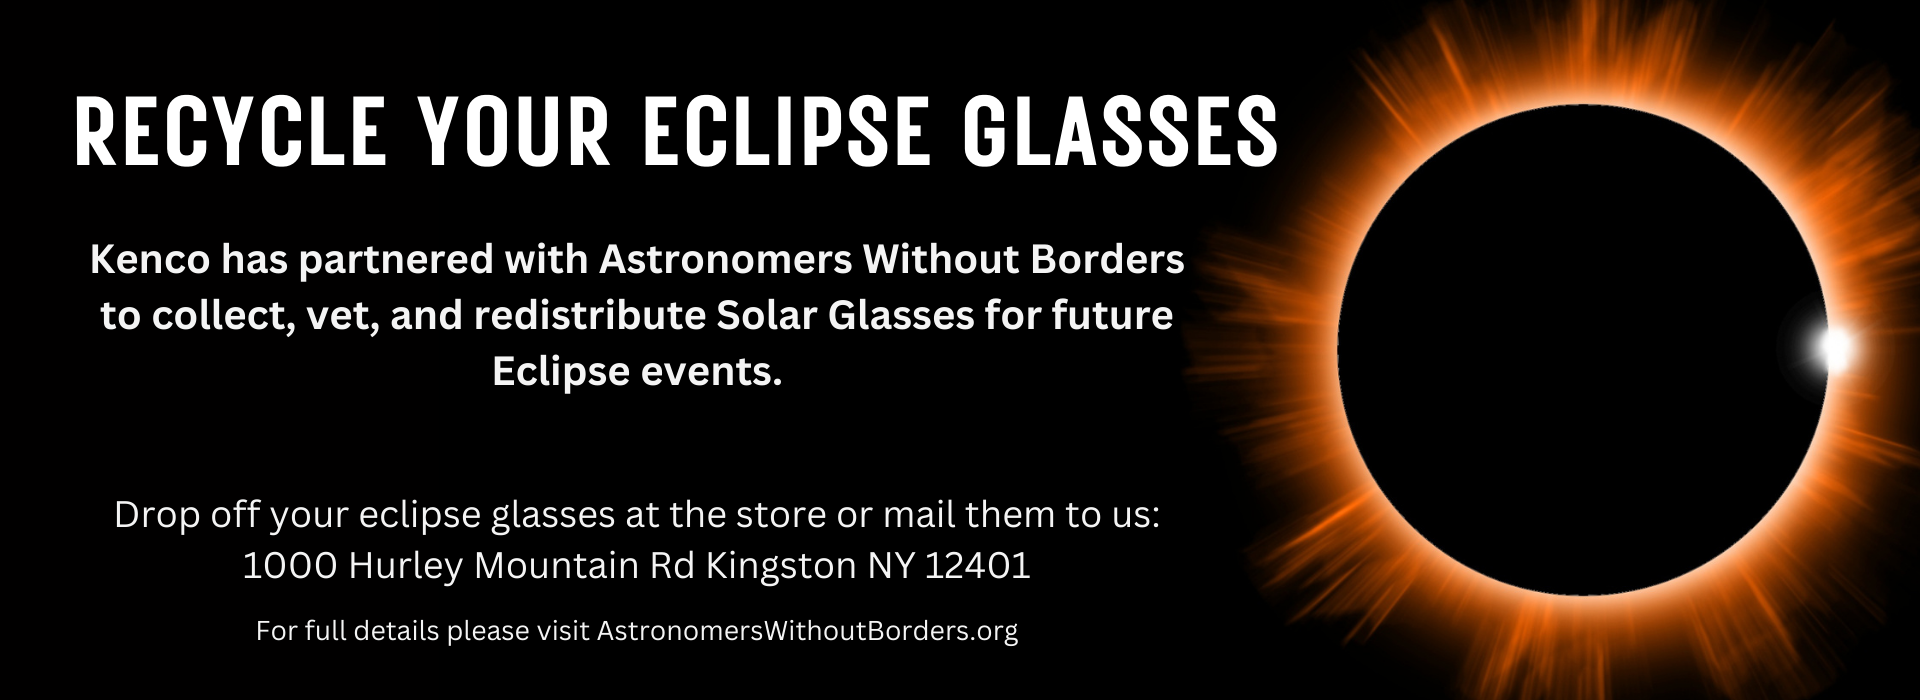 Recycle your eclipse glasses. Kenco has partnered with Astronomers Without Borders to collect, vet, and redistribute solar glasses for future eclipse events. Drop off your glasses at the store or mail them to us: 1000 Hurley Mountain Rd Kingston NY 12401. For full details please see AstronomersWithoutBorders.org 